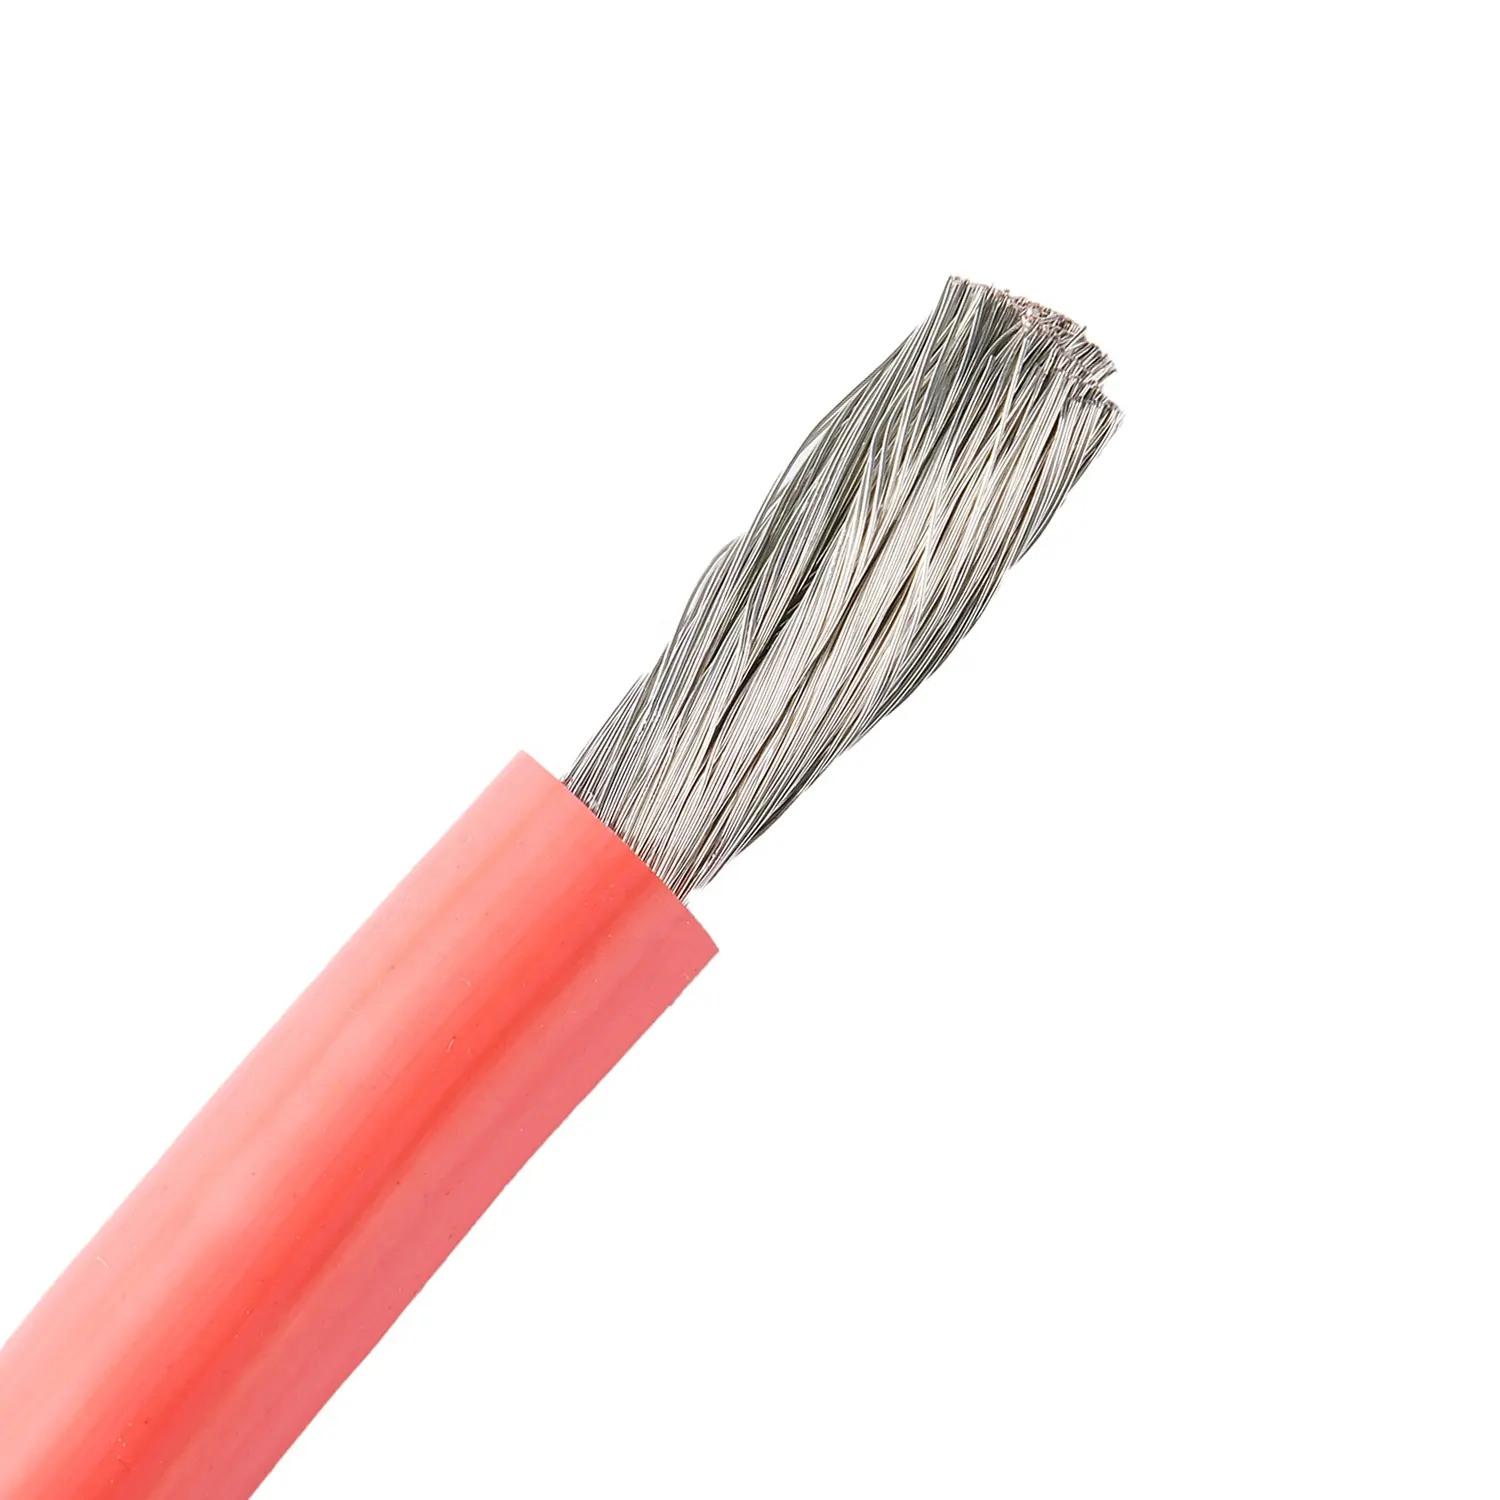 Dingzun Electric Tinned Copper Conductor Cable 100KVAC JGG Silicon Rubber Insulated High Voltage Heating Wire for Motor